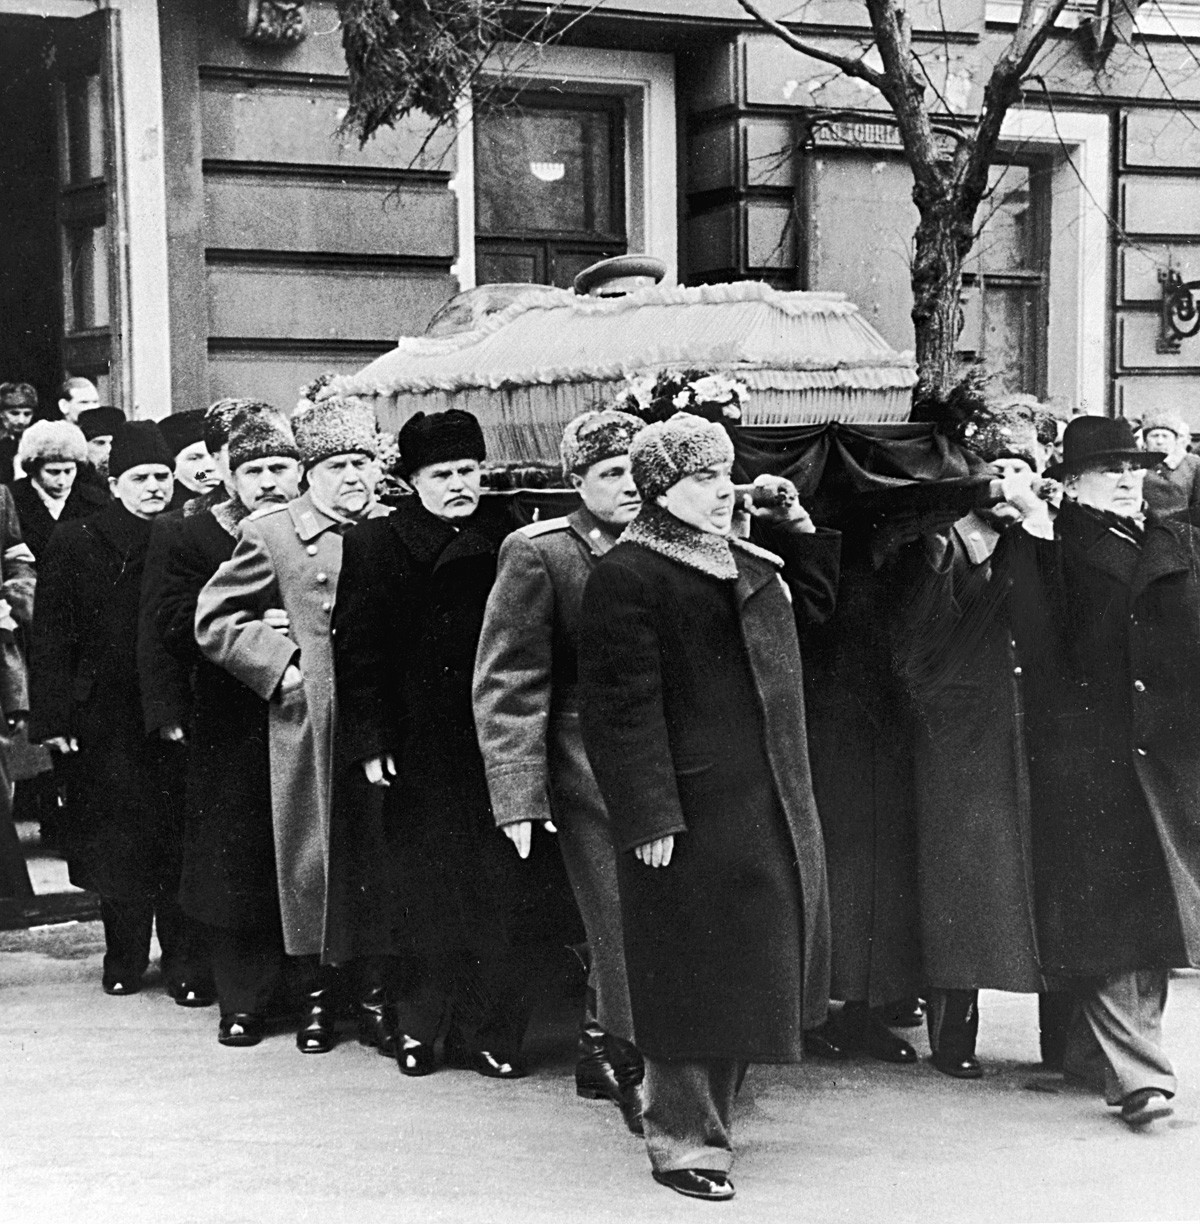 The coffin of Soviet political leader Joseph Stalin (1879 - 1953) is carried by his closest officials.